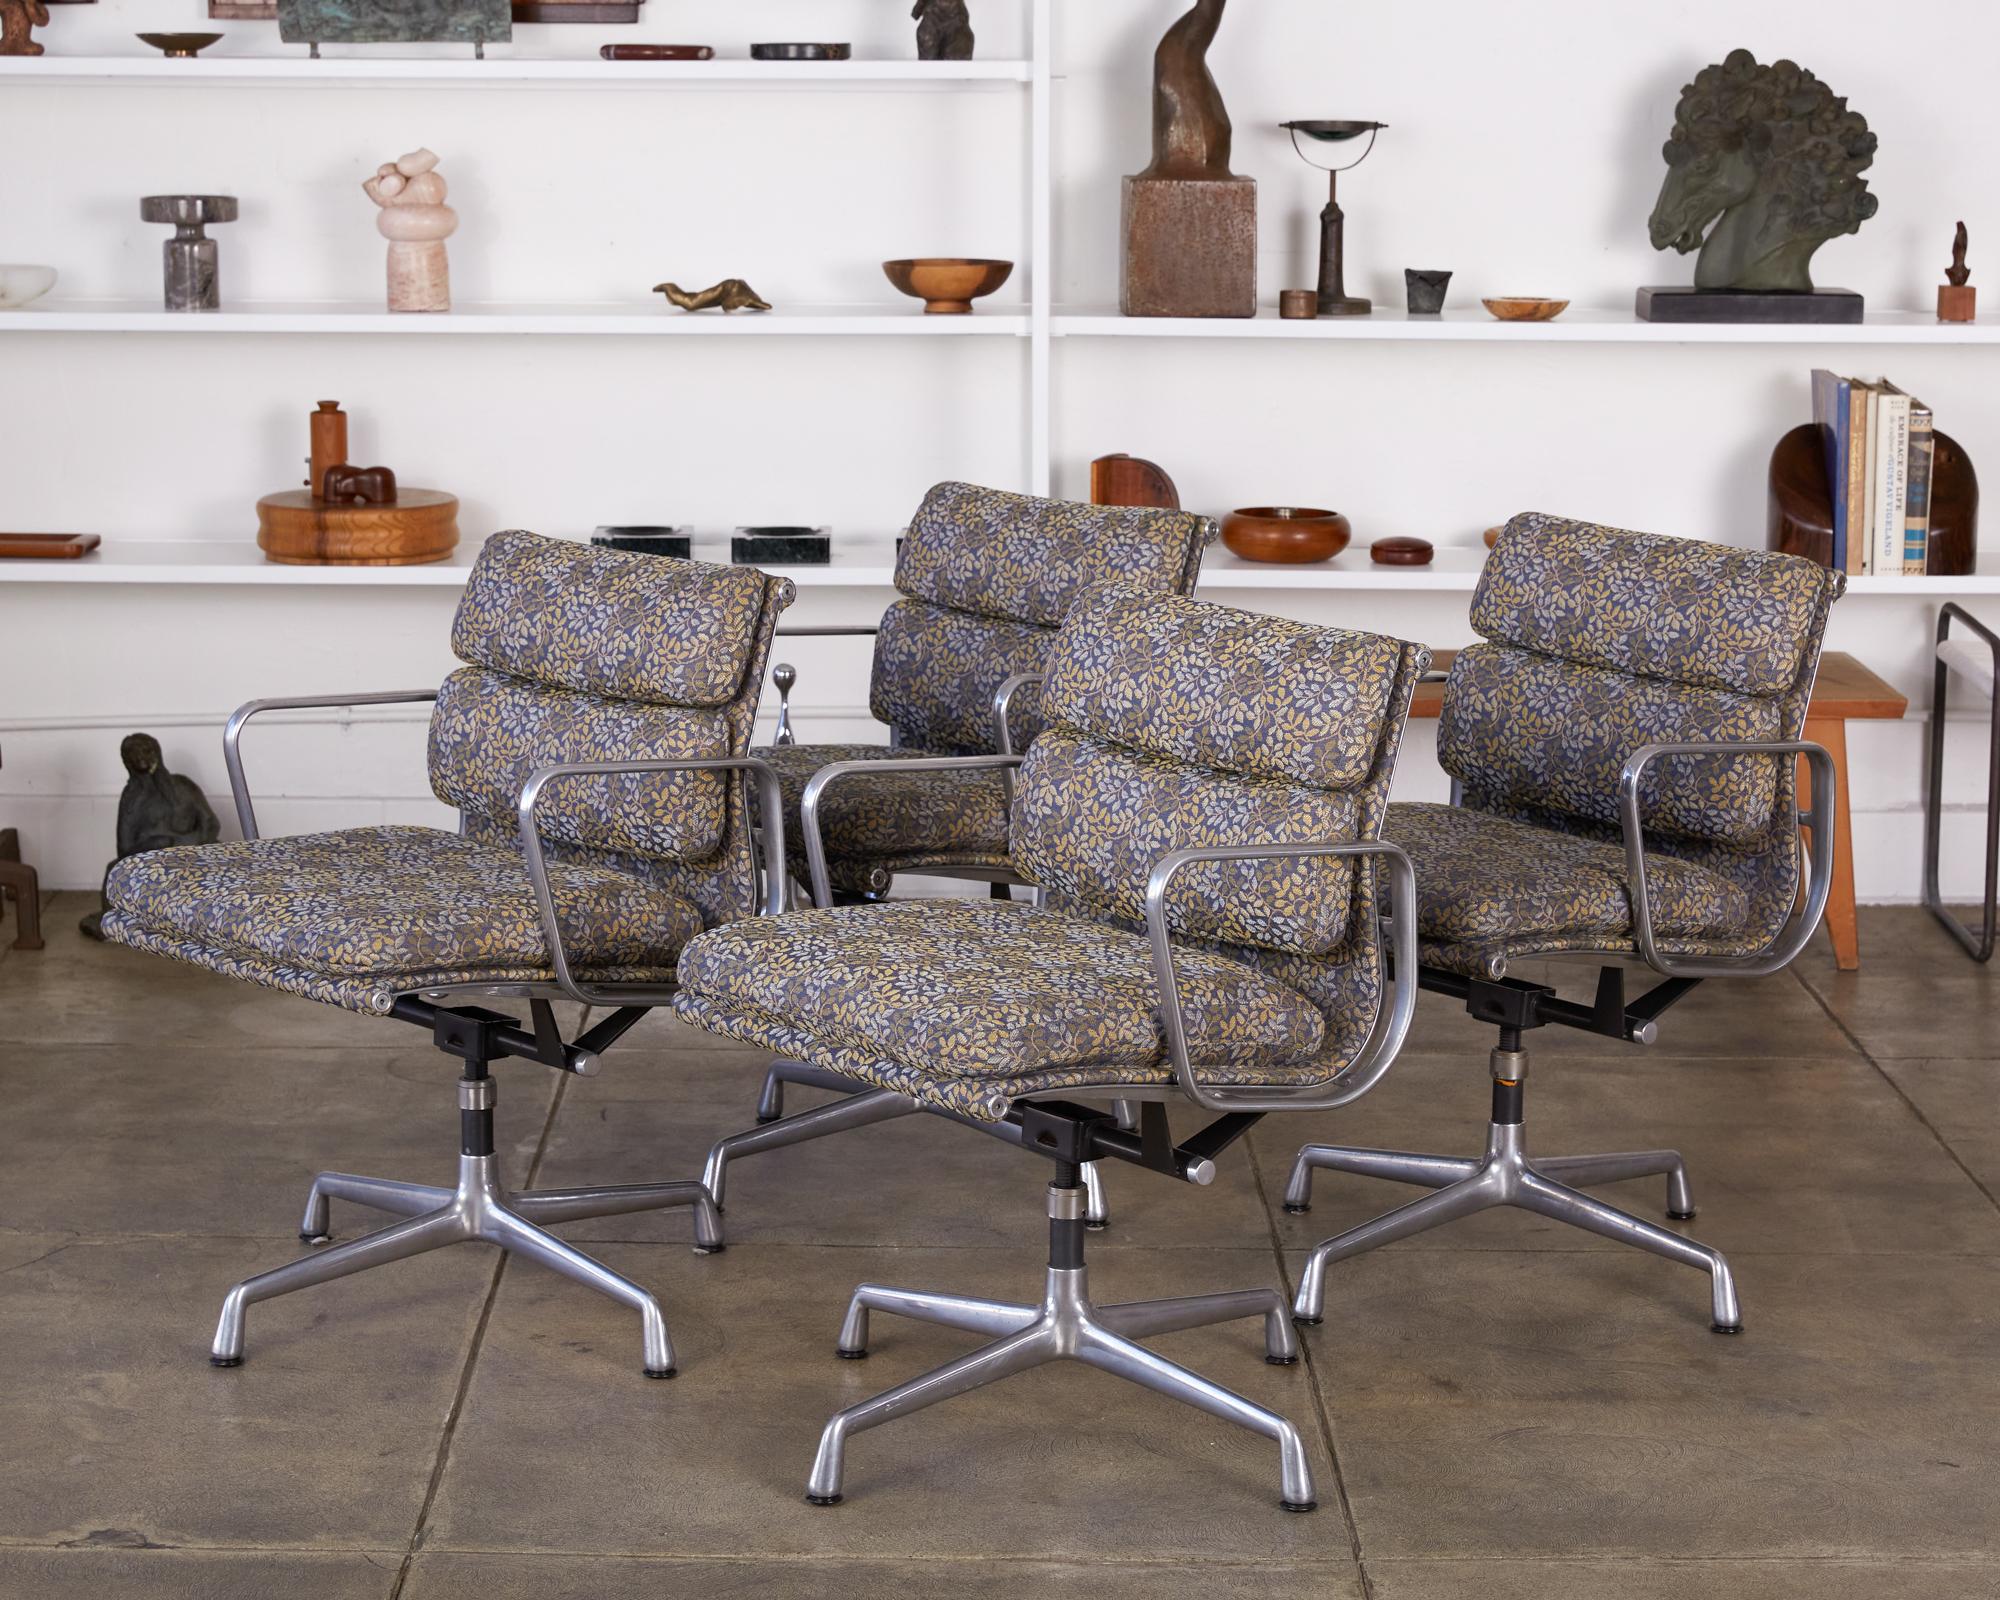 A descendant of the Aluminum Group, these soft pad management chairs were designed in 1969 and are cushier than their counterparts. These are finished in a foliage print fabric with a royal blue background and green, yellow and white flowers. Their